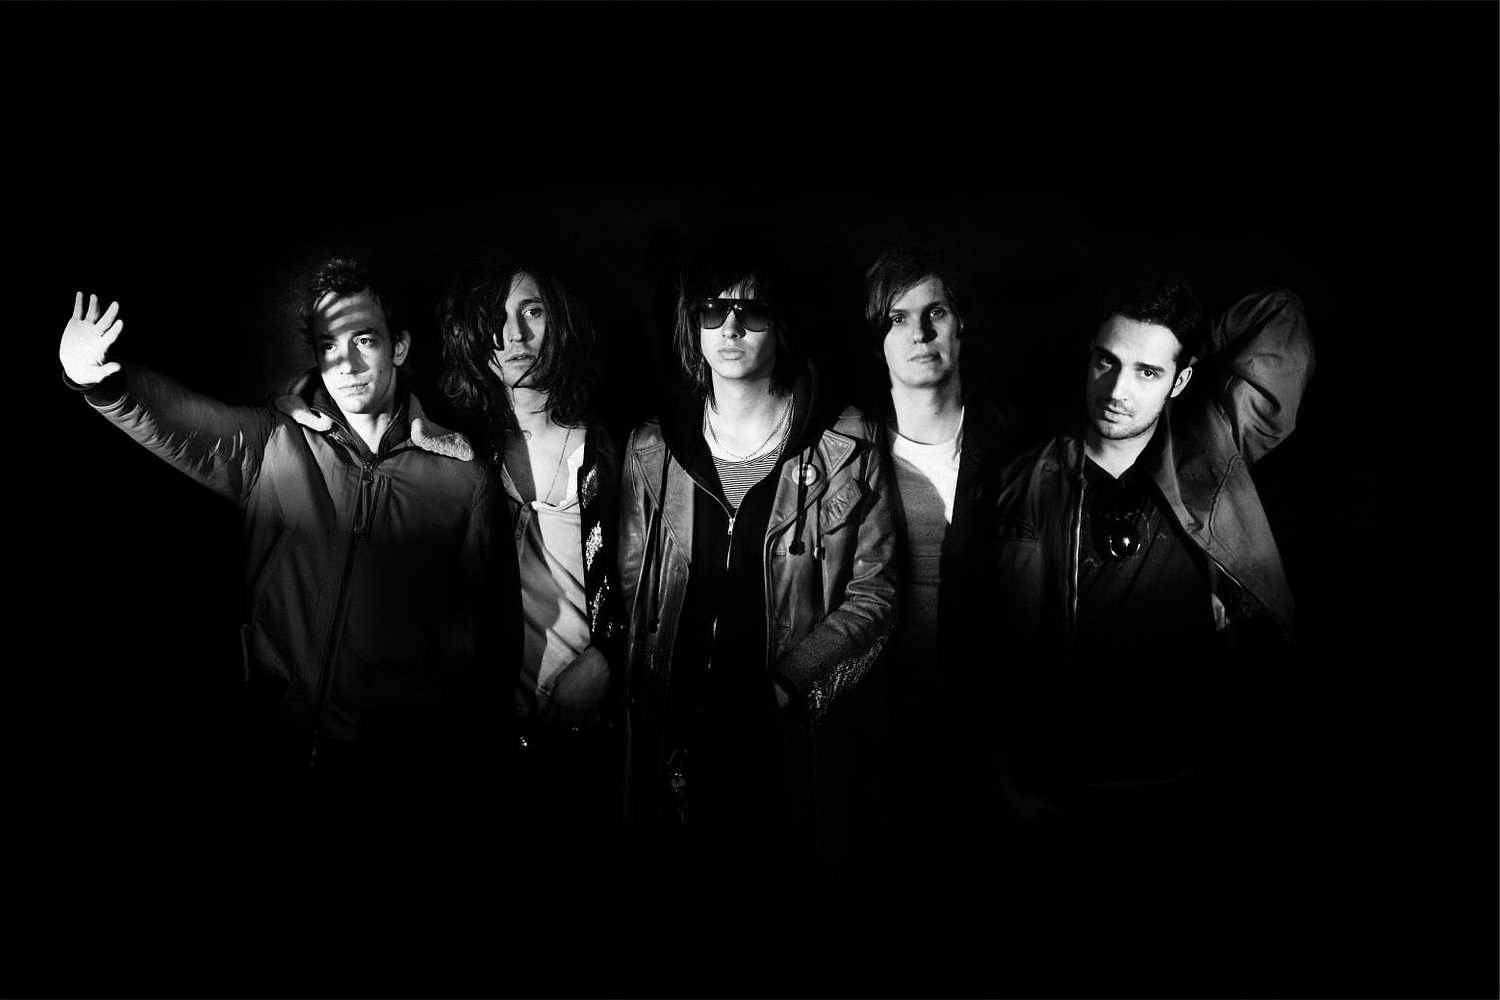 Julian Casablancas confirms collaboration between The Strokes and Savages